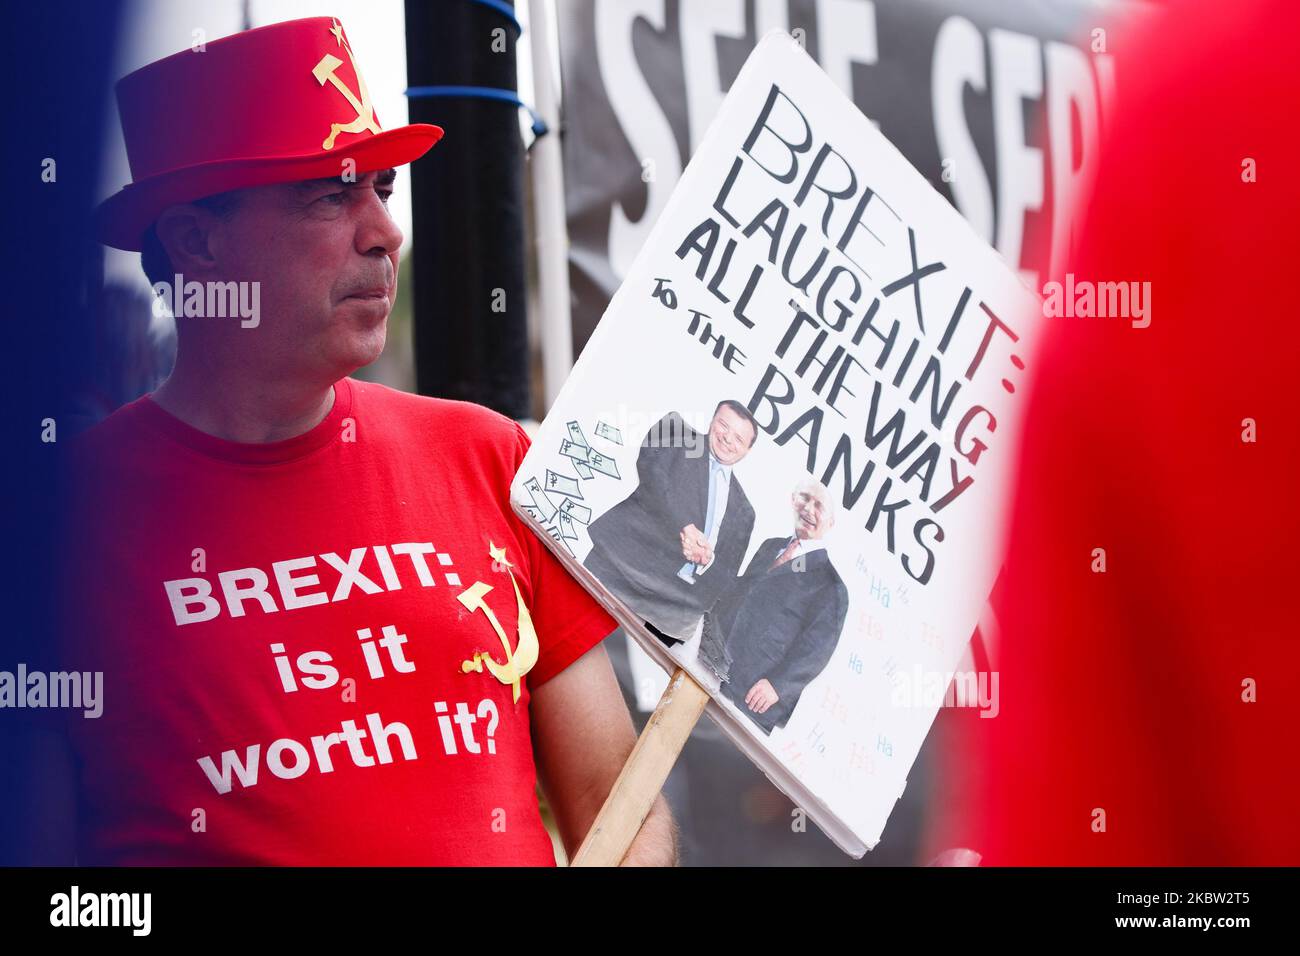 Anti-Brexit activist Steve Bray, wearing a hat and t-shirt featuring a hammer and sickle, demonstrates outside the Houses of Parliament in London, England, on July 22, 2020. Yesterday saw the publication of the long-awaited Intelligence and Security Committee (ISC) report on Russian activity in the UK, which includes among its assertions the claim that the British government 'actively avoided' investigating possible Russian interference in the 2016 referendum on EU membership. (Photo by David Cliff/NurPhoto) Stock Photo